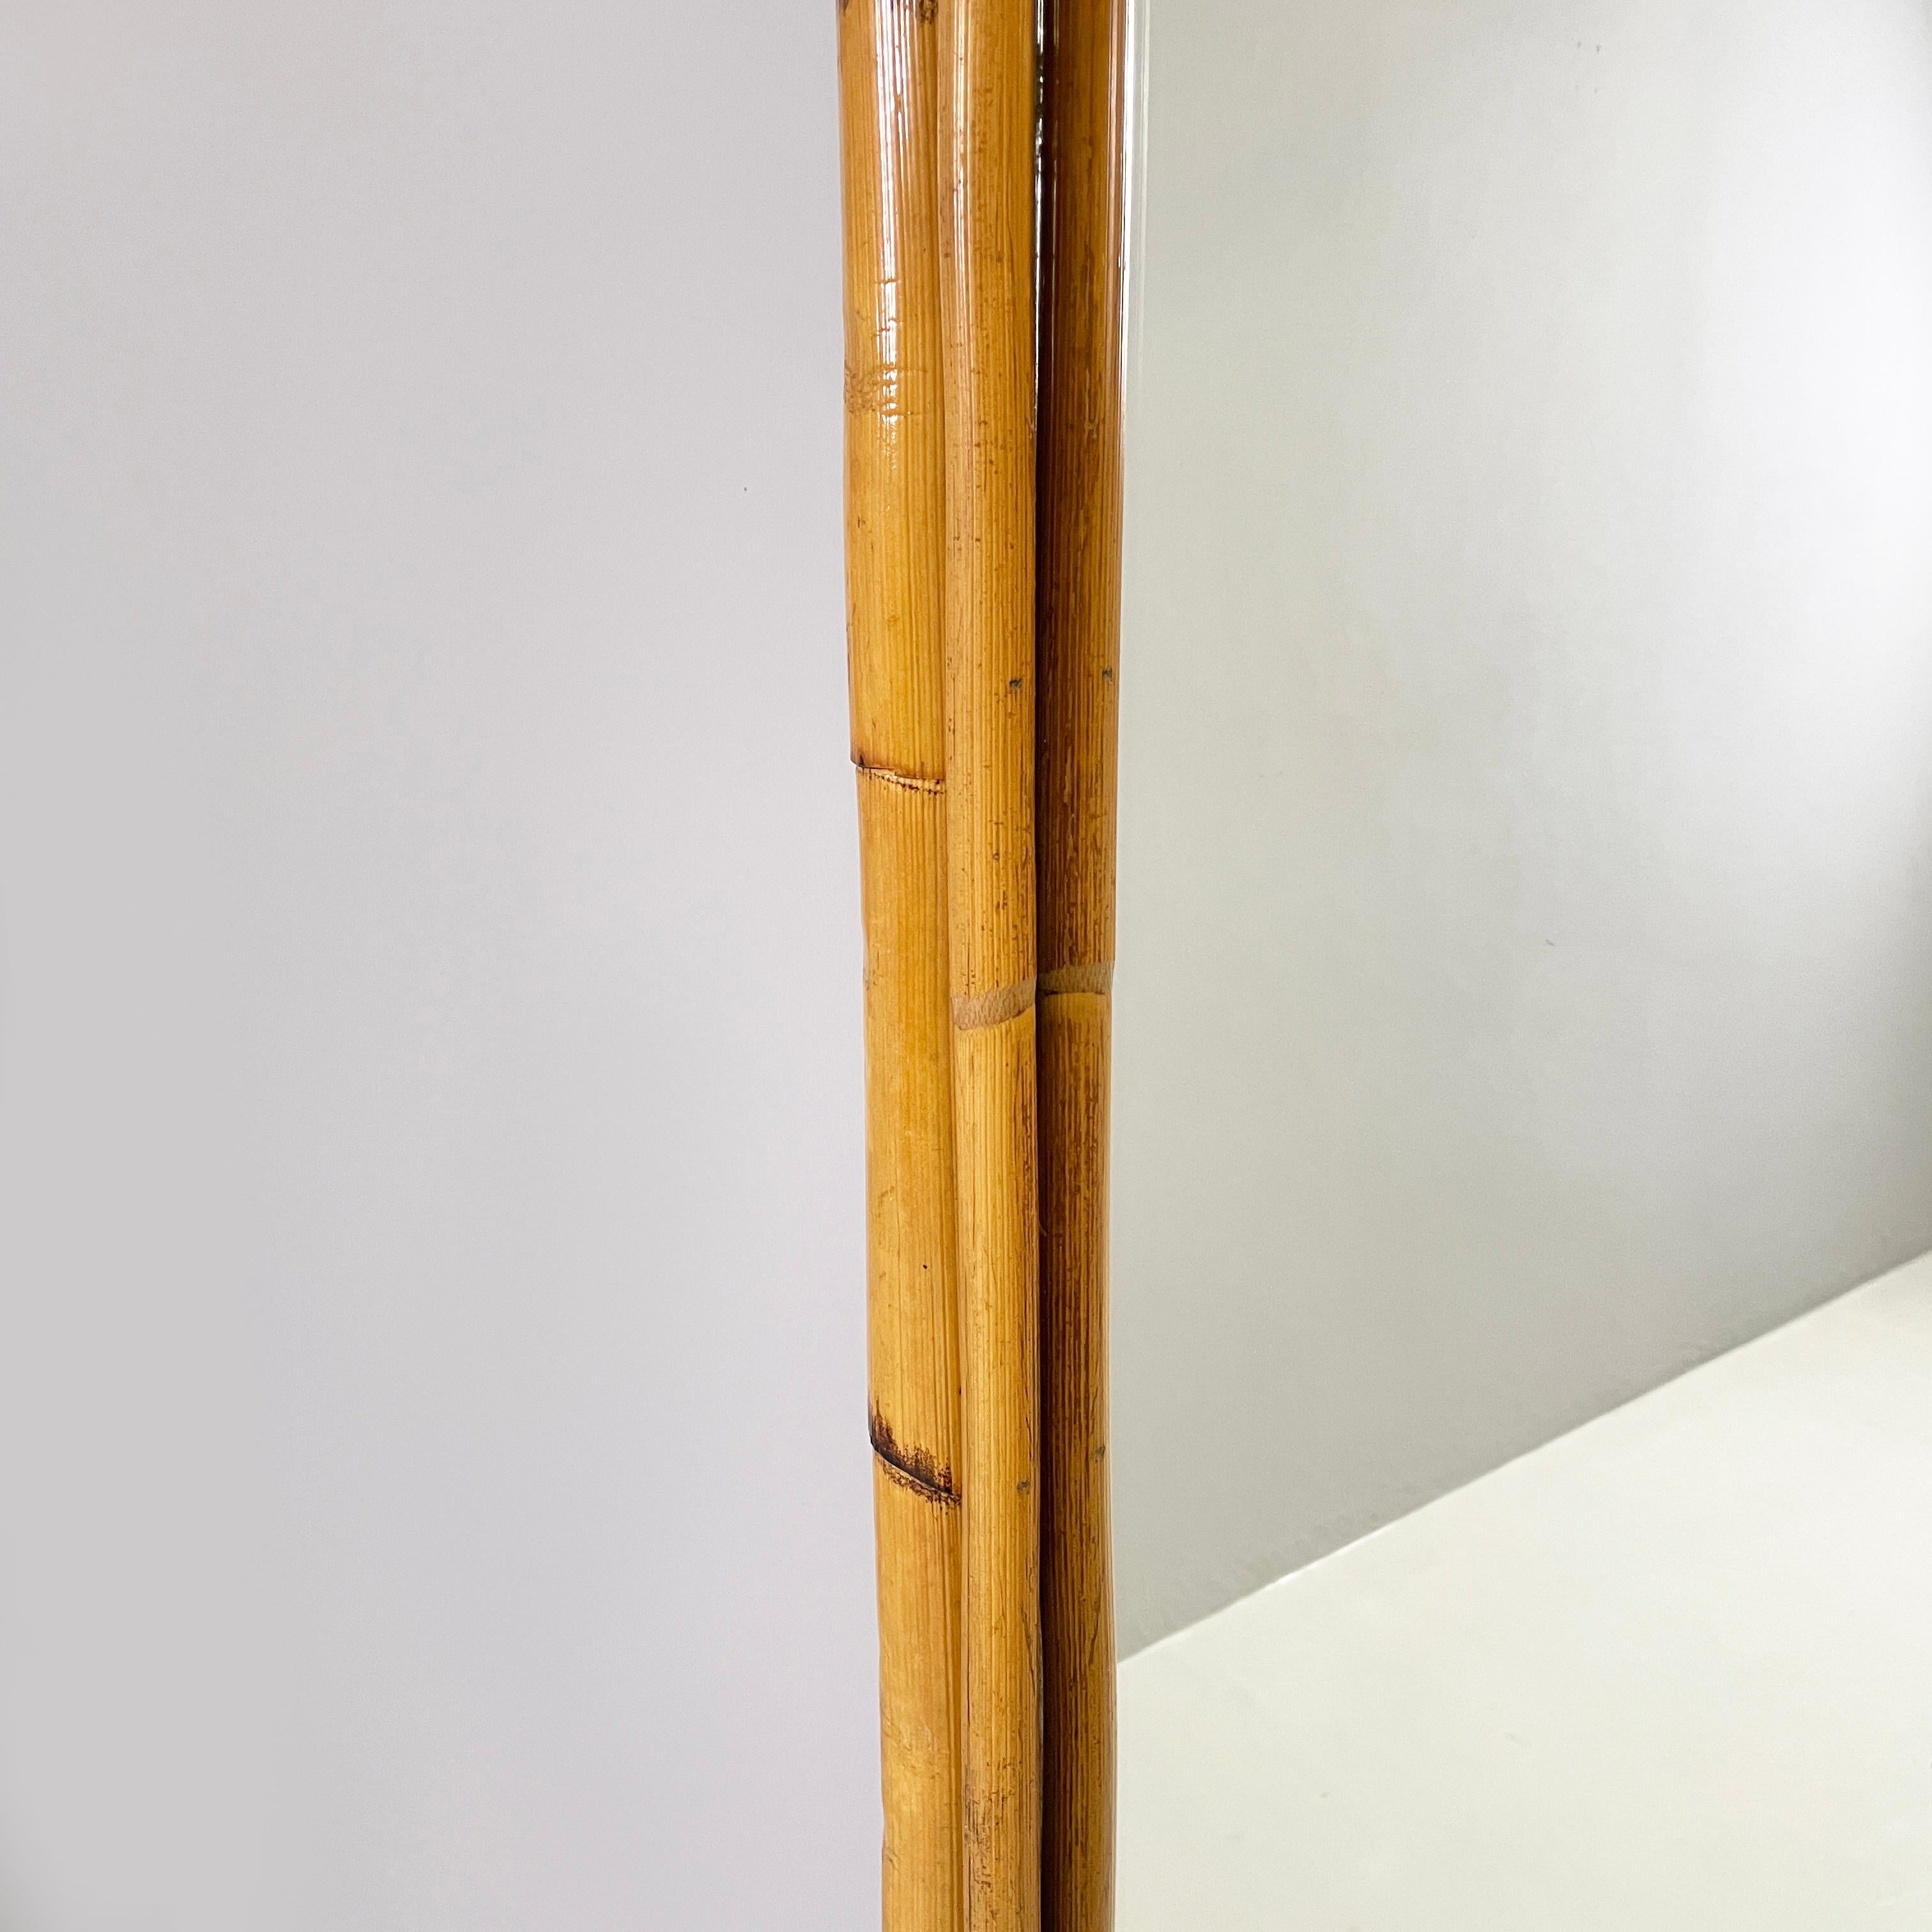 Italian mid-century modern Wall and Full-Length mirror with bamboo, 1960s For Sale 1